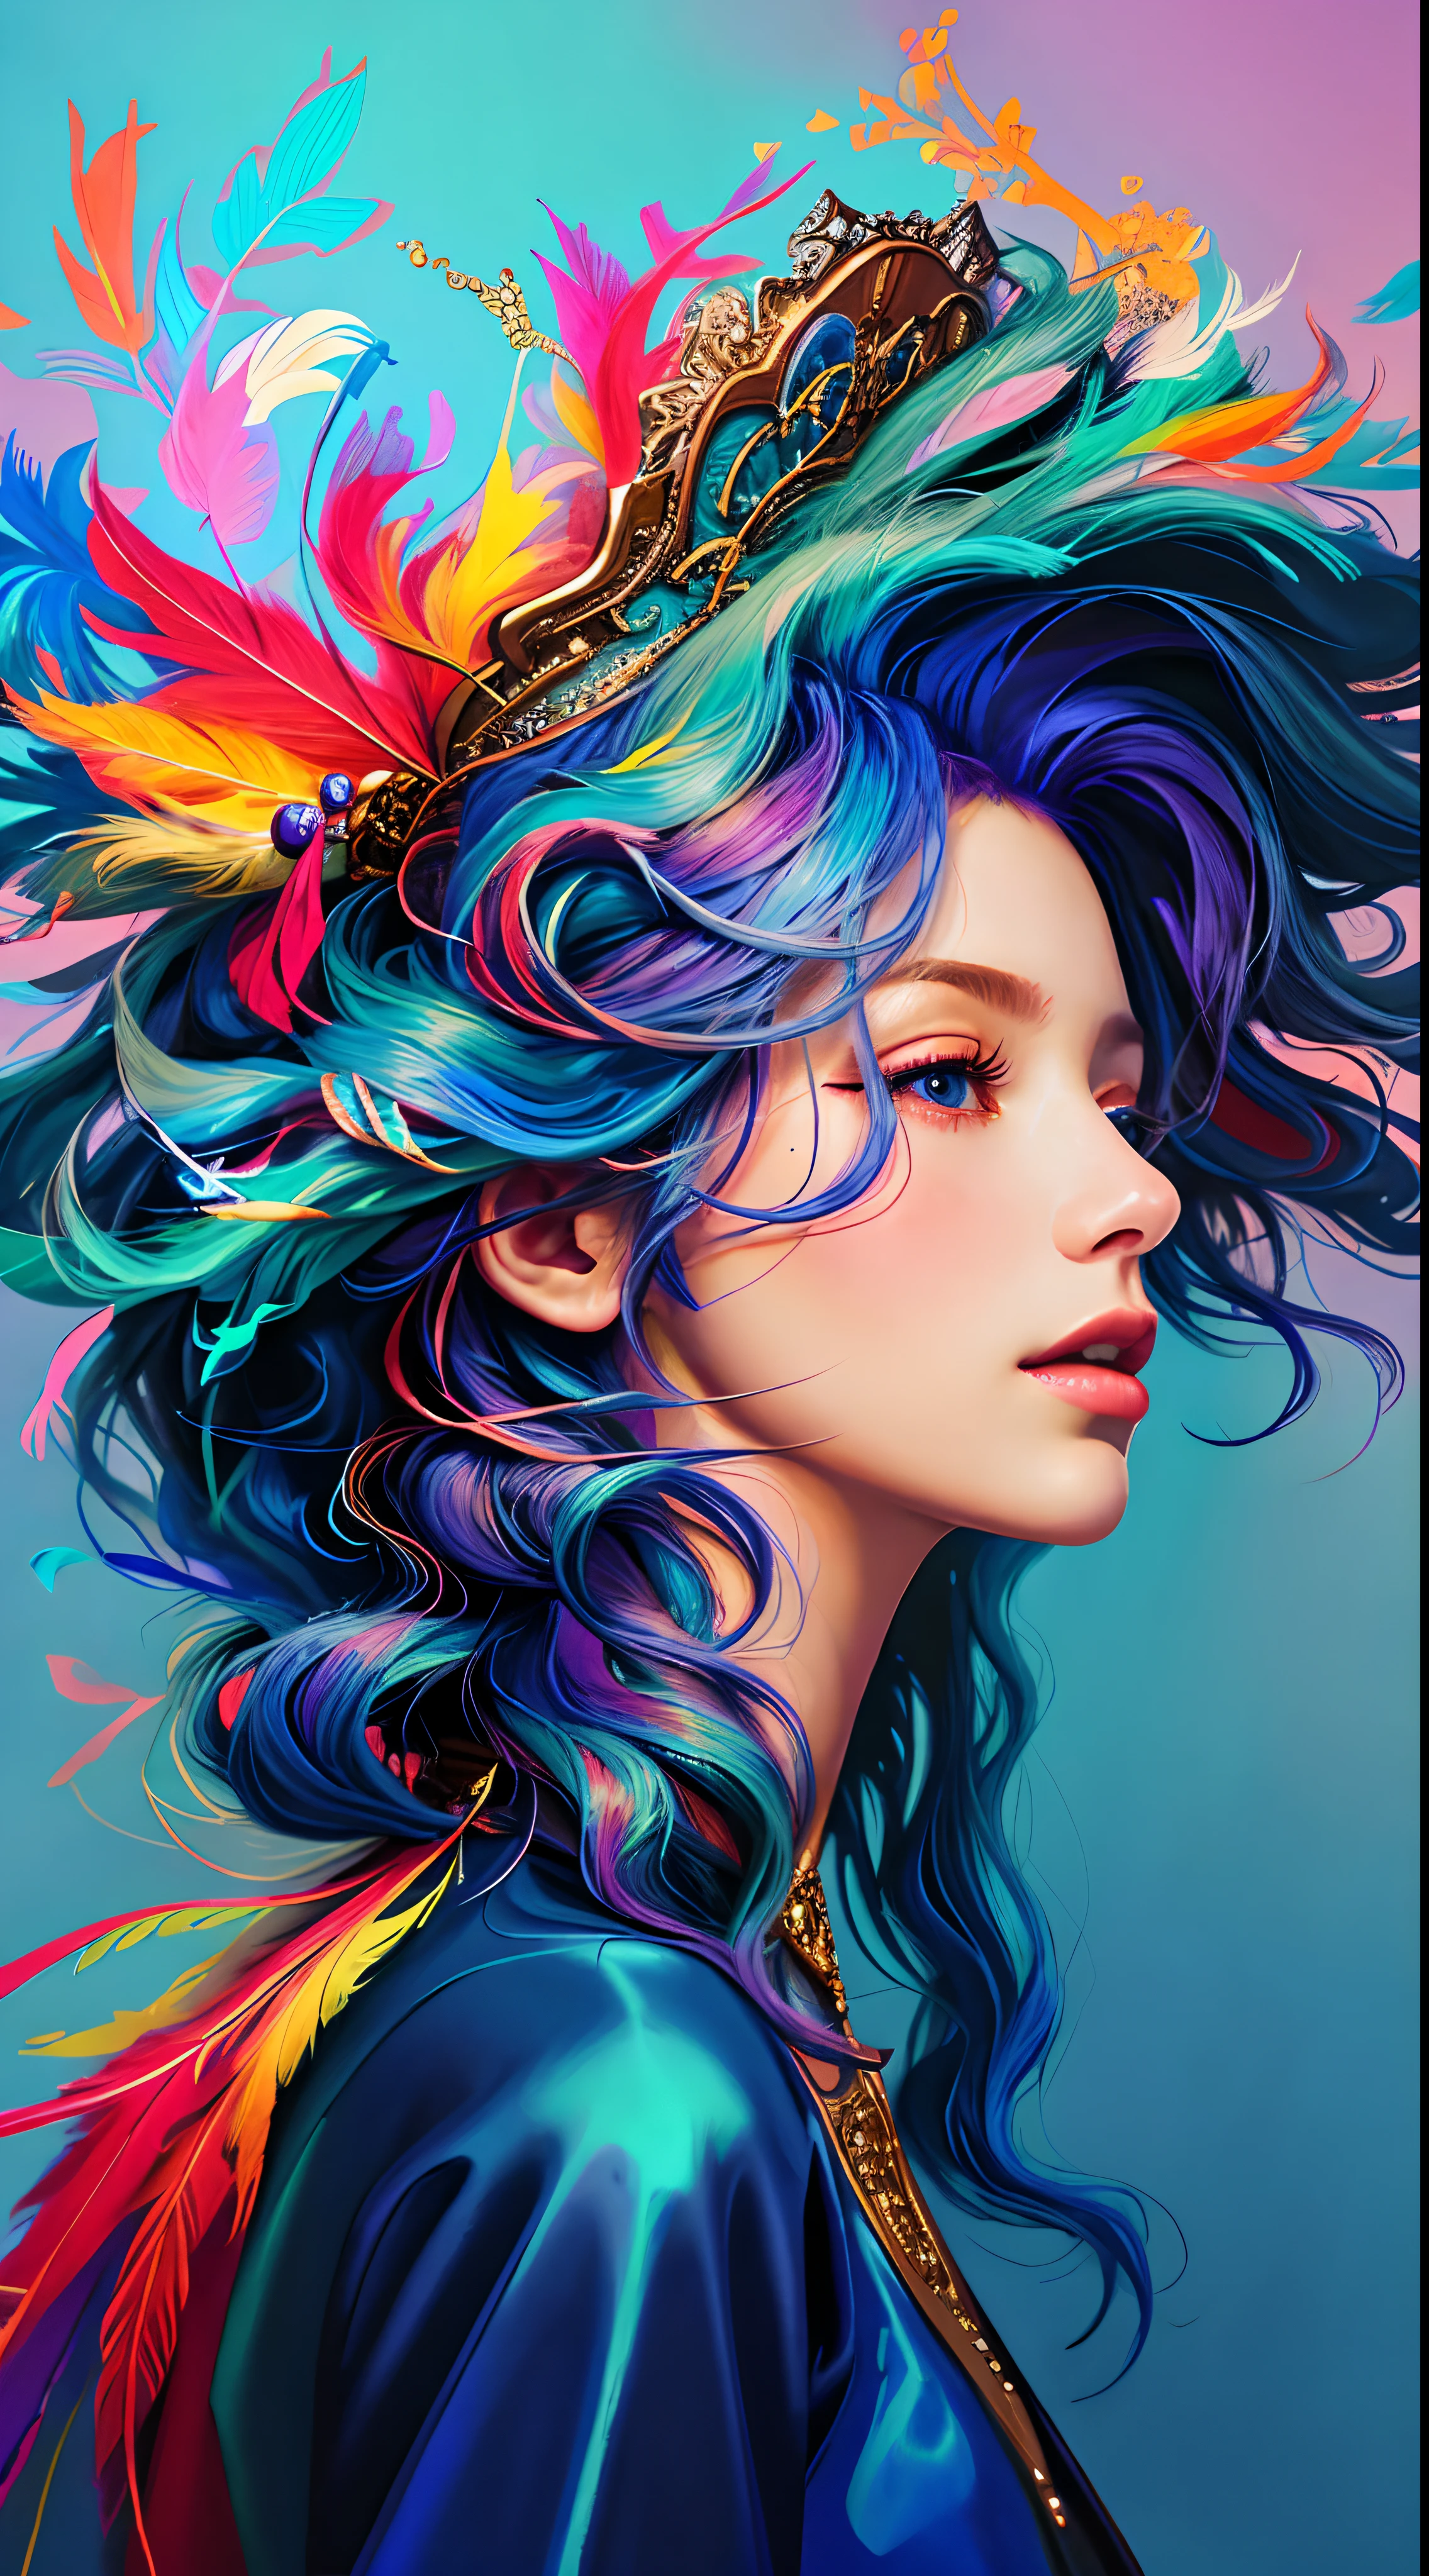 A painting of a woman with colored hair and feathers on her head, lindo arte digital, Arte de Alessandro Pautasso, exquisite digital illustration, linda arte digital linda, pintura digital colorida, arte colorida bonita!, Bela arte UHD 4K, Pintura digital vibrante, bela arte digital, full-colour illustration, arte da pintura digital, stunning digital illustration, arte de fantasia digital colorida